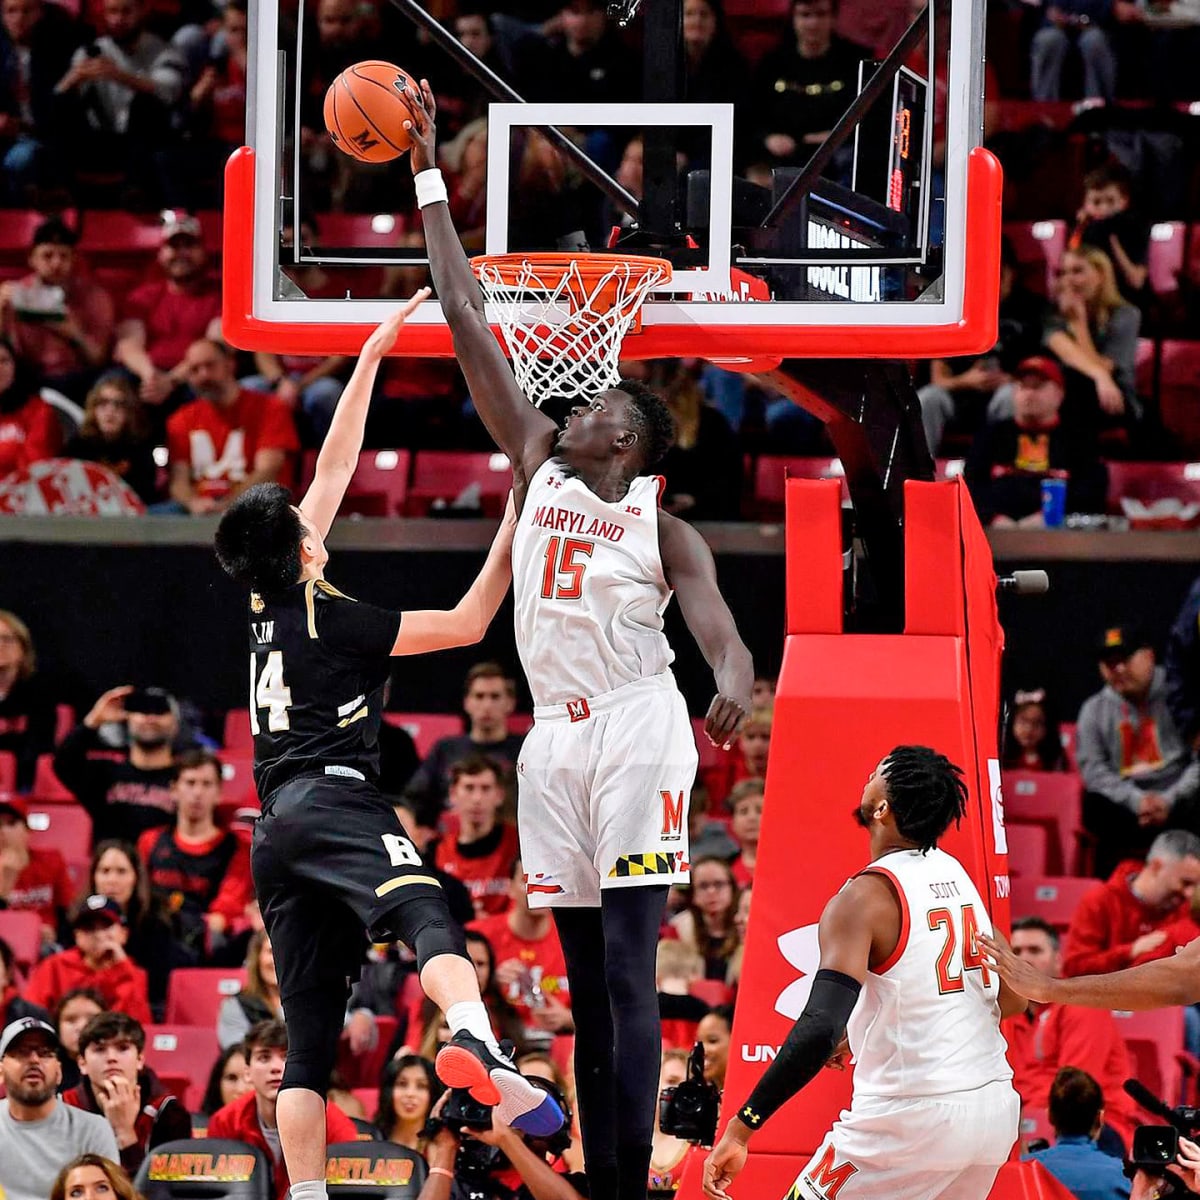 Chol Marial Maryland 7 Footer S Long Journey To College